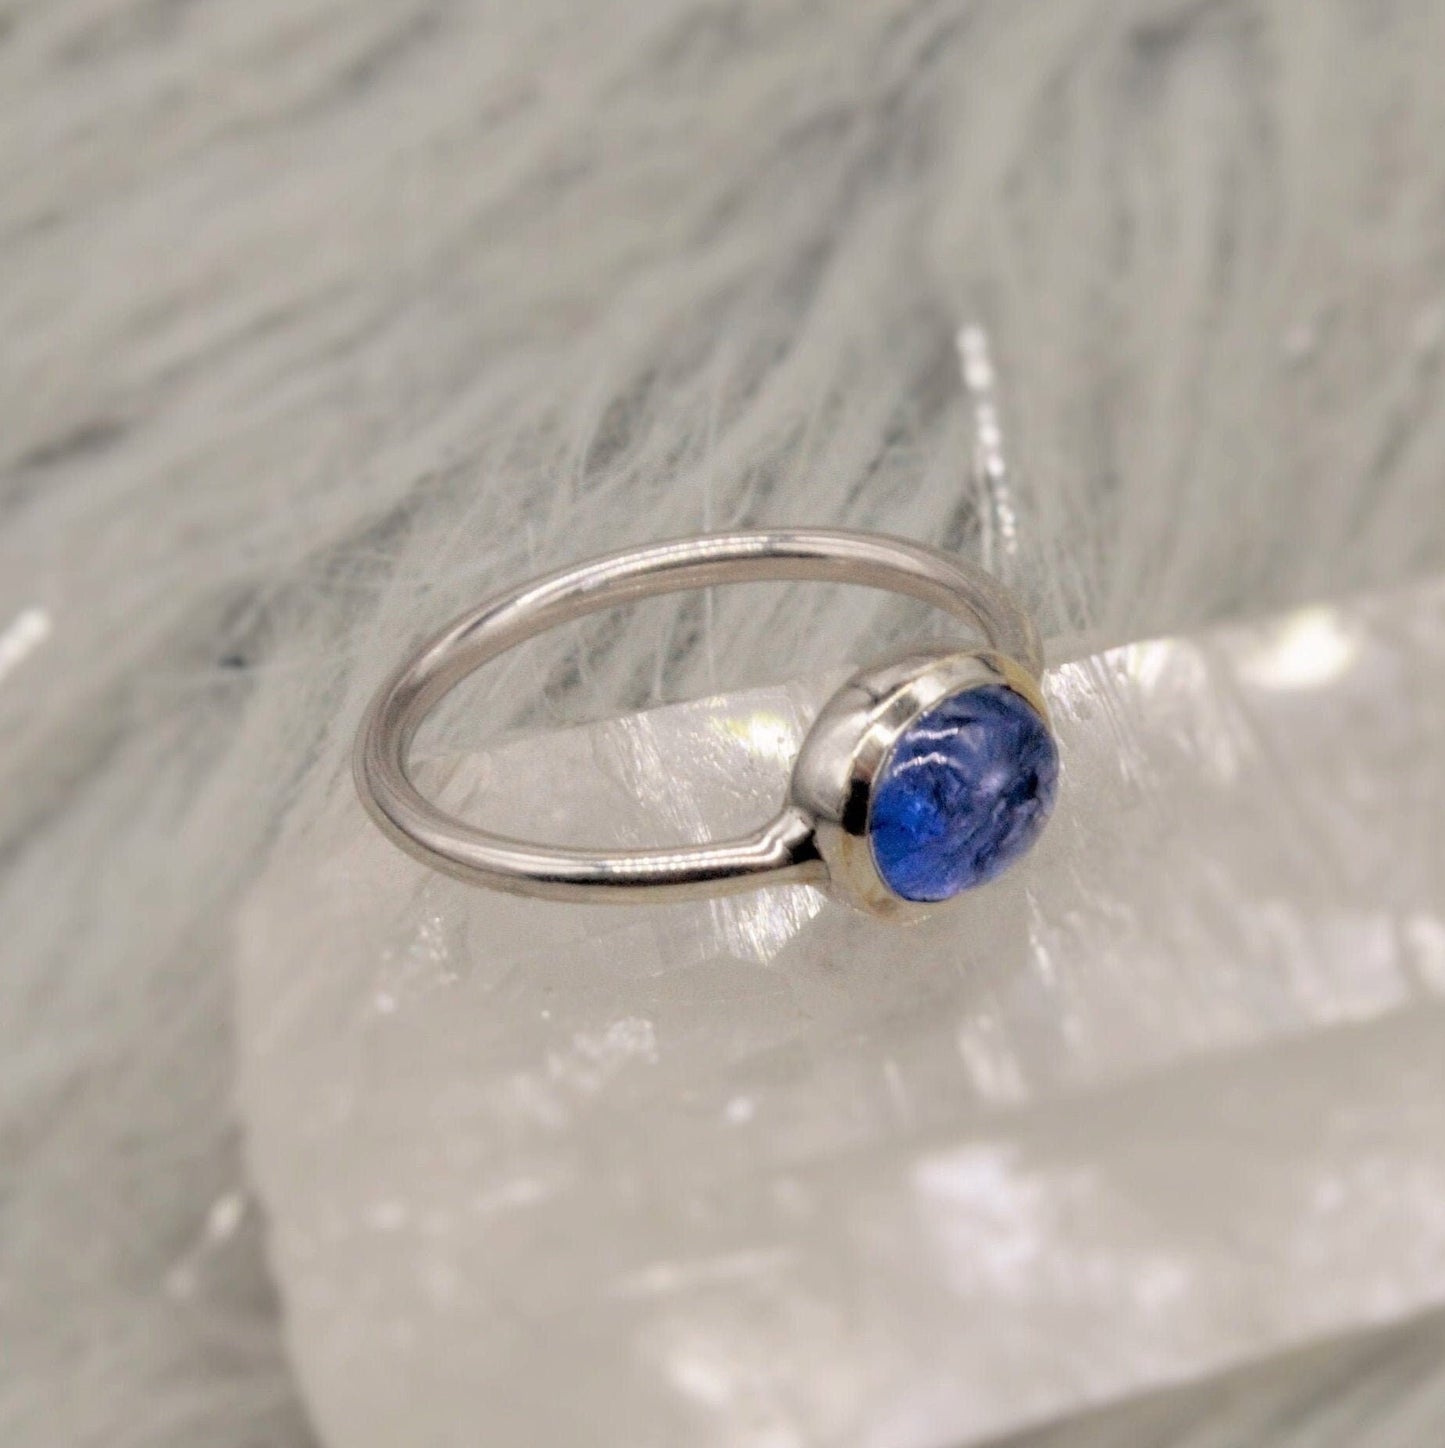 Tanzanite 925 Sterling Silver Ring, Rings for Women, Dainty Blue Gemstone Ring, December Birthstone, Blue Gem Ring, Gifts For Her